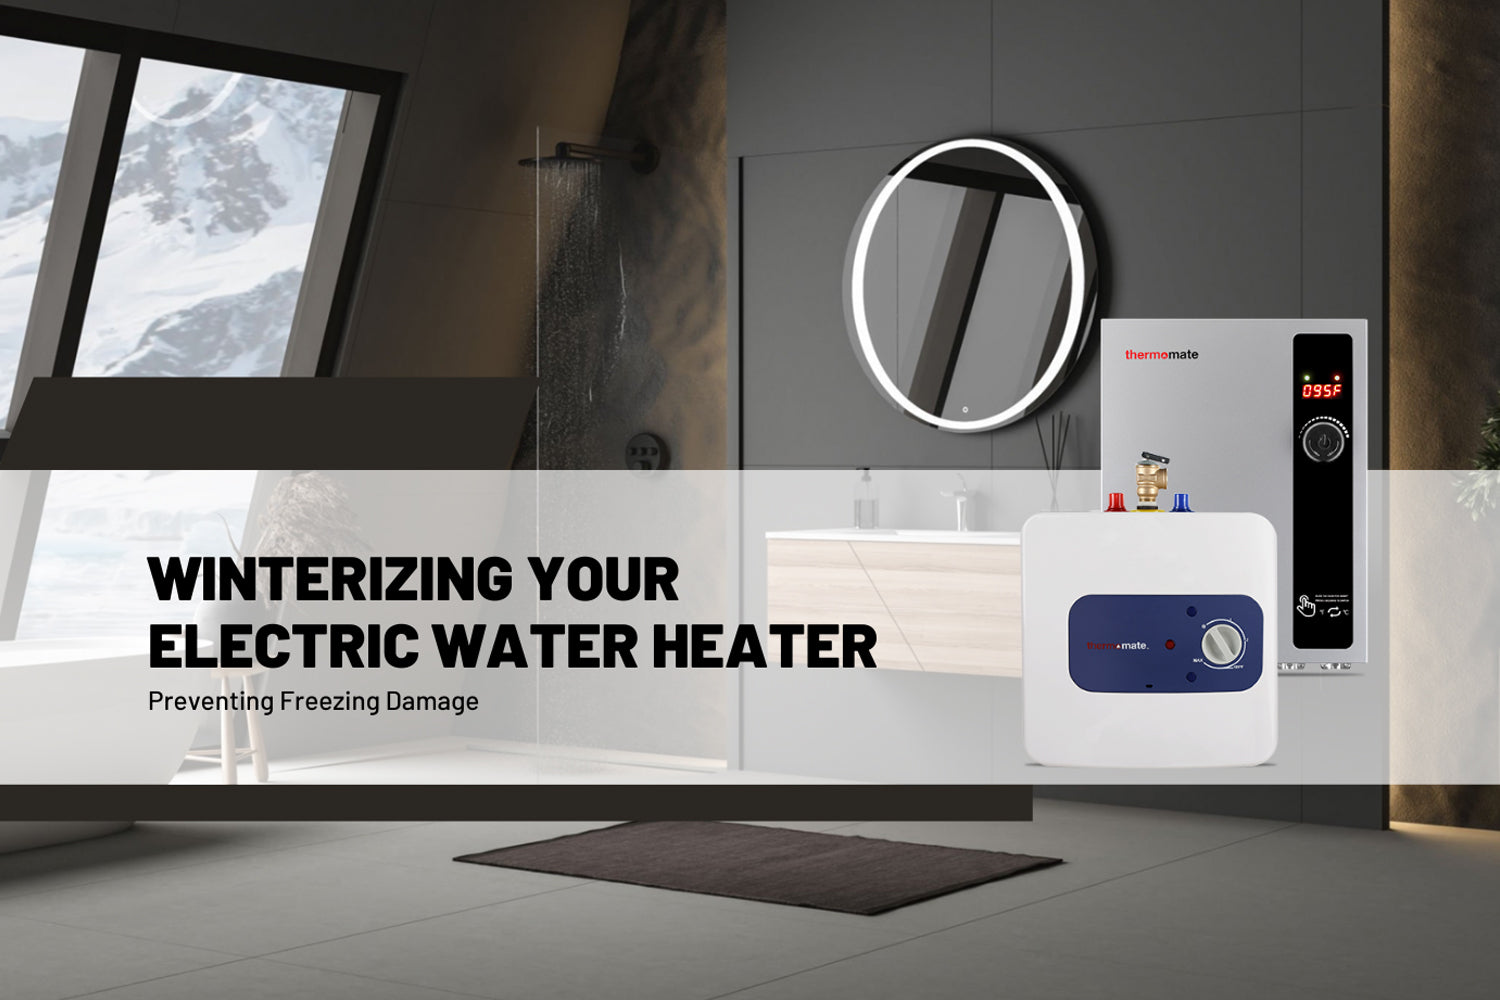 Winterizing Your Electric Water Heater: Preventing Freezing Damage